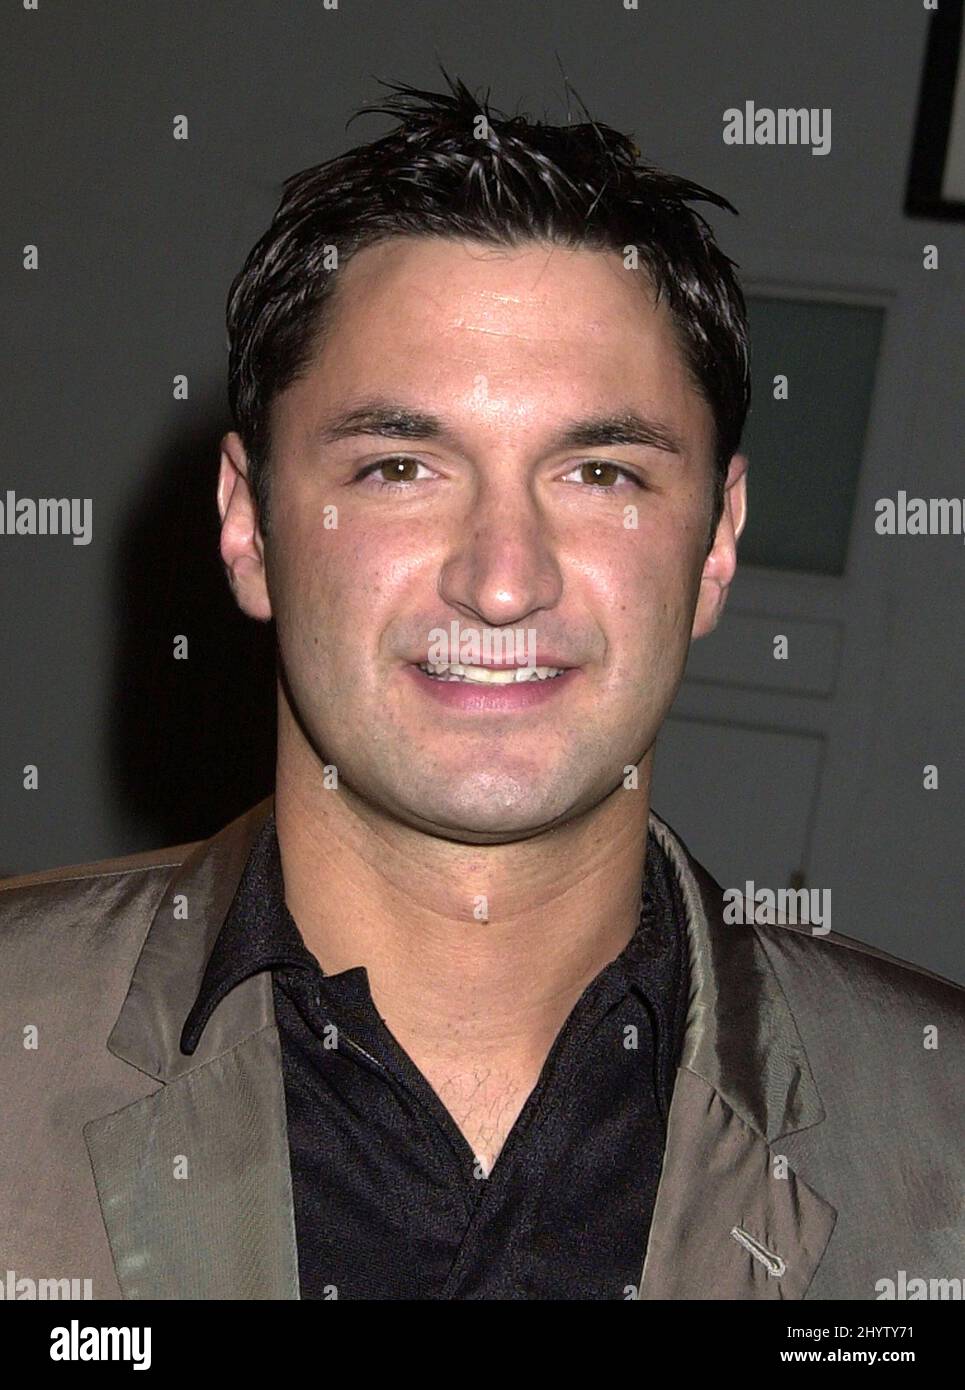 File picture dated January 15, 2002 of Andy Hallett who played 'Lorne' in the television series 'Angel'. The singer/actor had struggled with congestive heart disease since 2004. Stock Photo